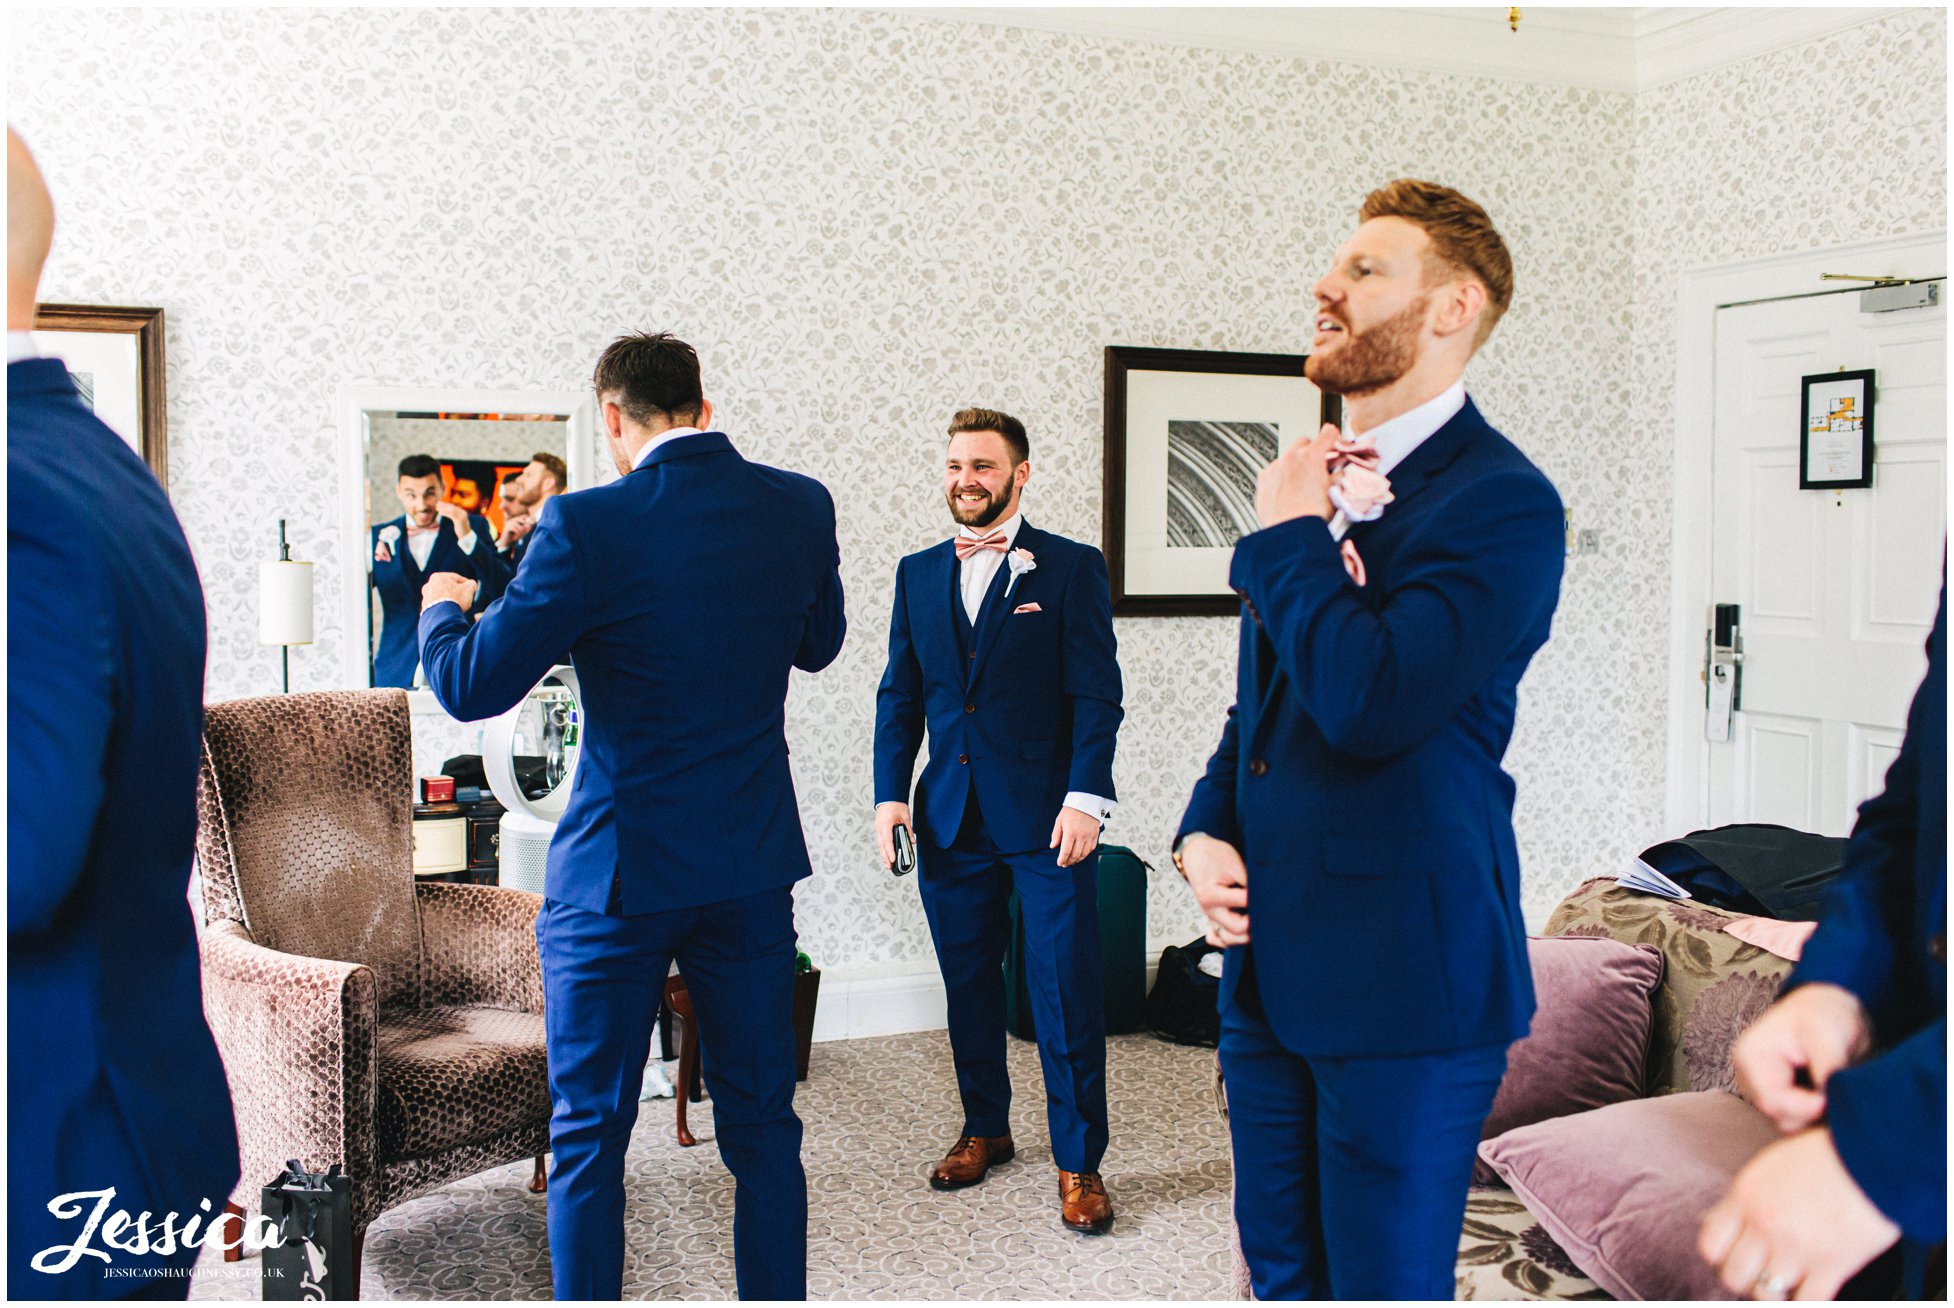 the groom &amp; groomsmen are dressed ready for the wedding at mottram hall